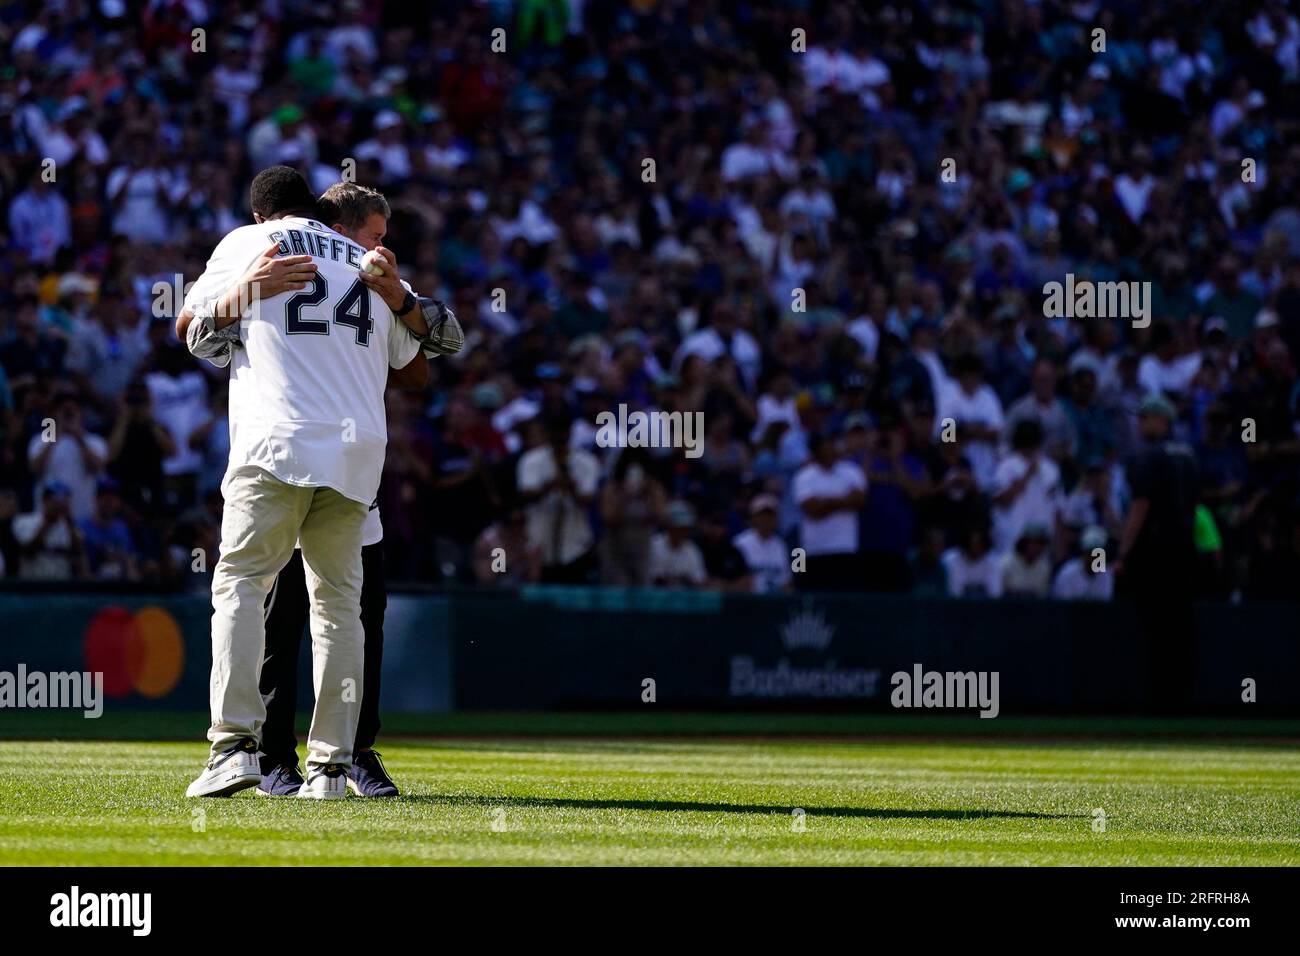 Former Seattle Mariners players Edgar Martinez, facing, greets Ken Griffey  Jr. (24) as they prepare to throw out ceremonial first pitches during the  MLB All-Star baseball game in Seattle, Tuesday, July 11